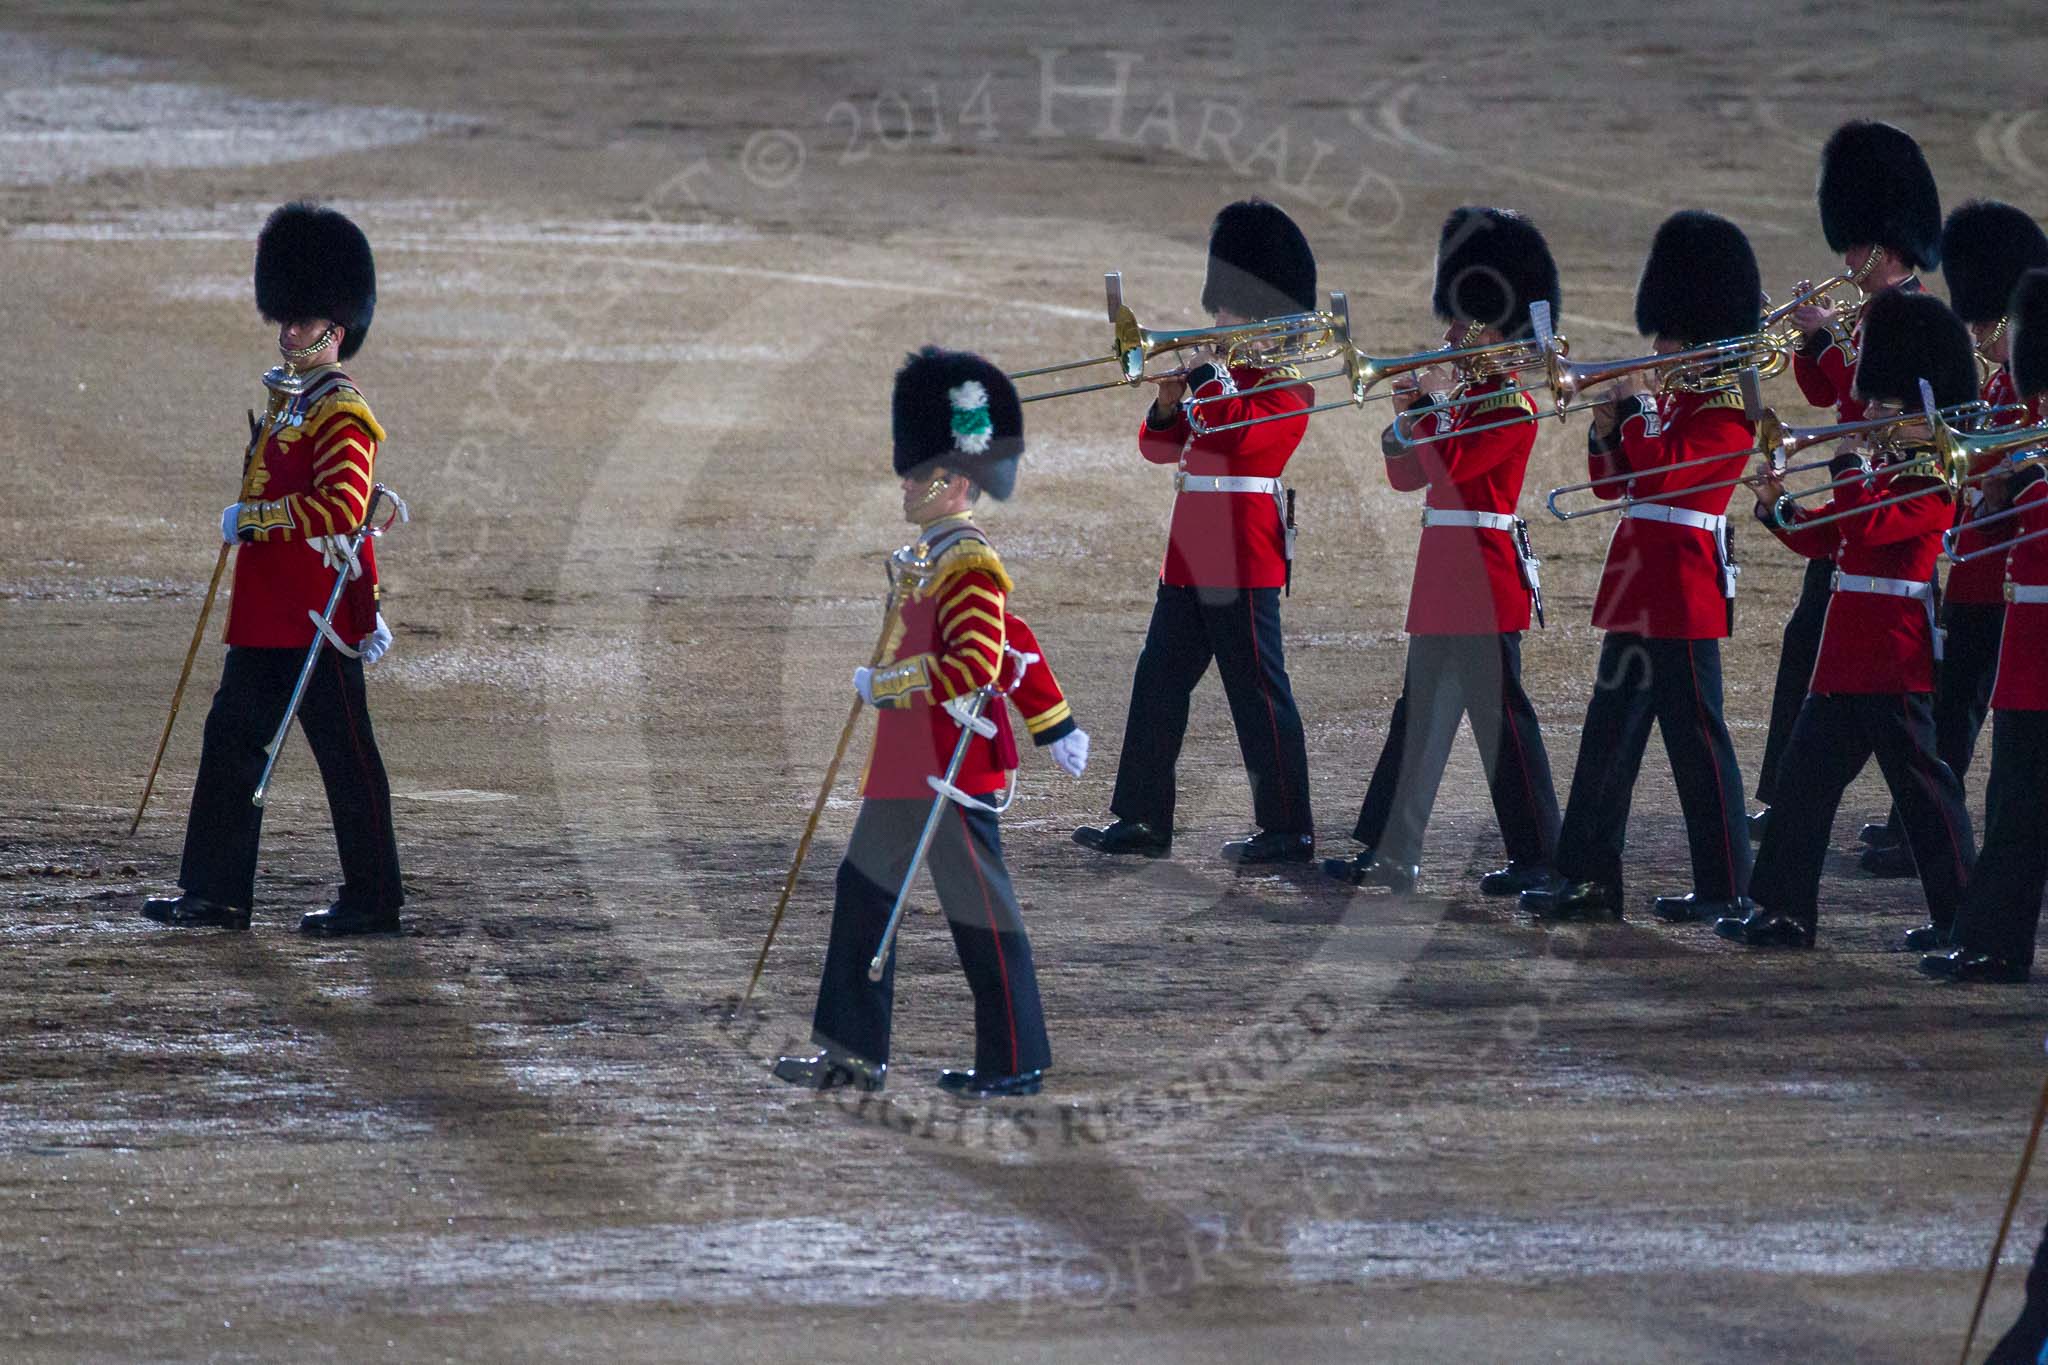 Beating Retreat 2014.
Horse Guards Parade, Westminster,
London SW1A,

United Kingdom,
on 11 June 2014 at 21:35, image #361